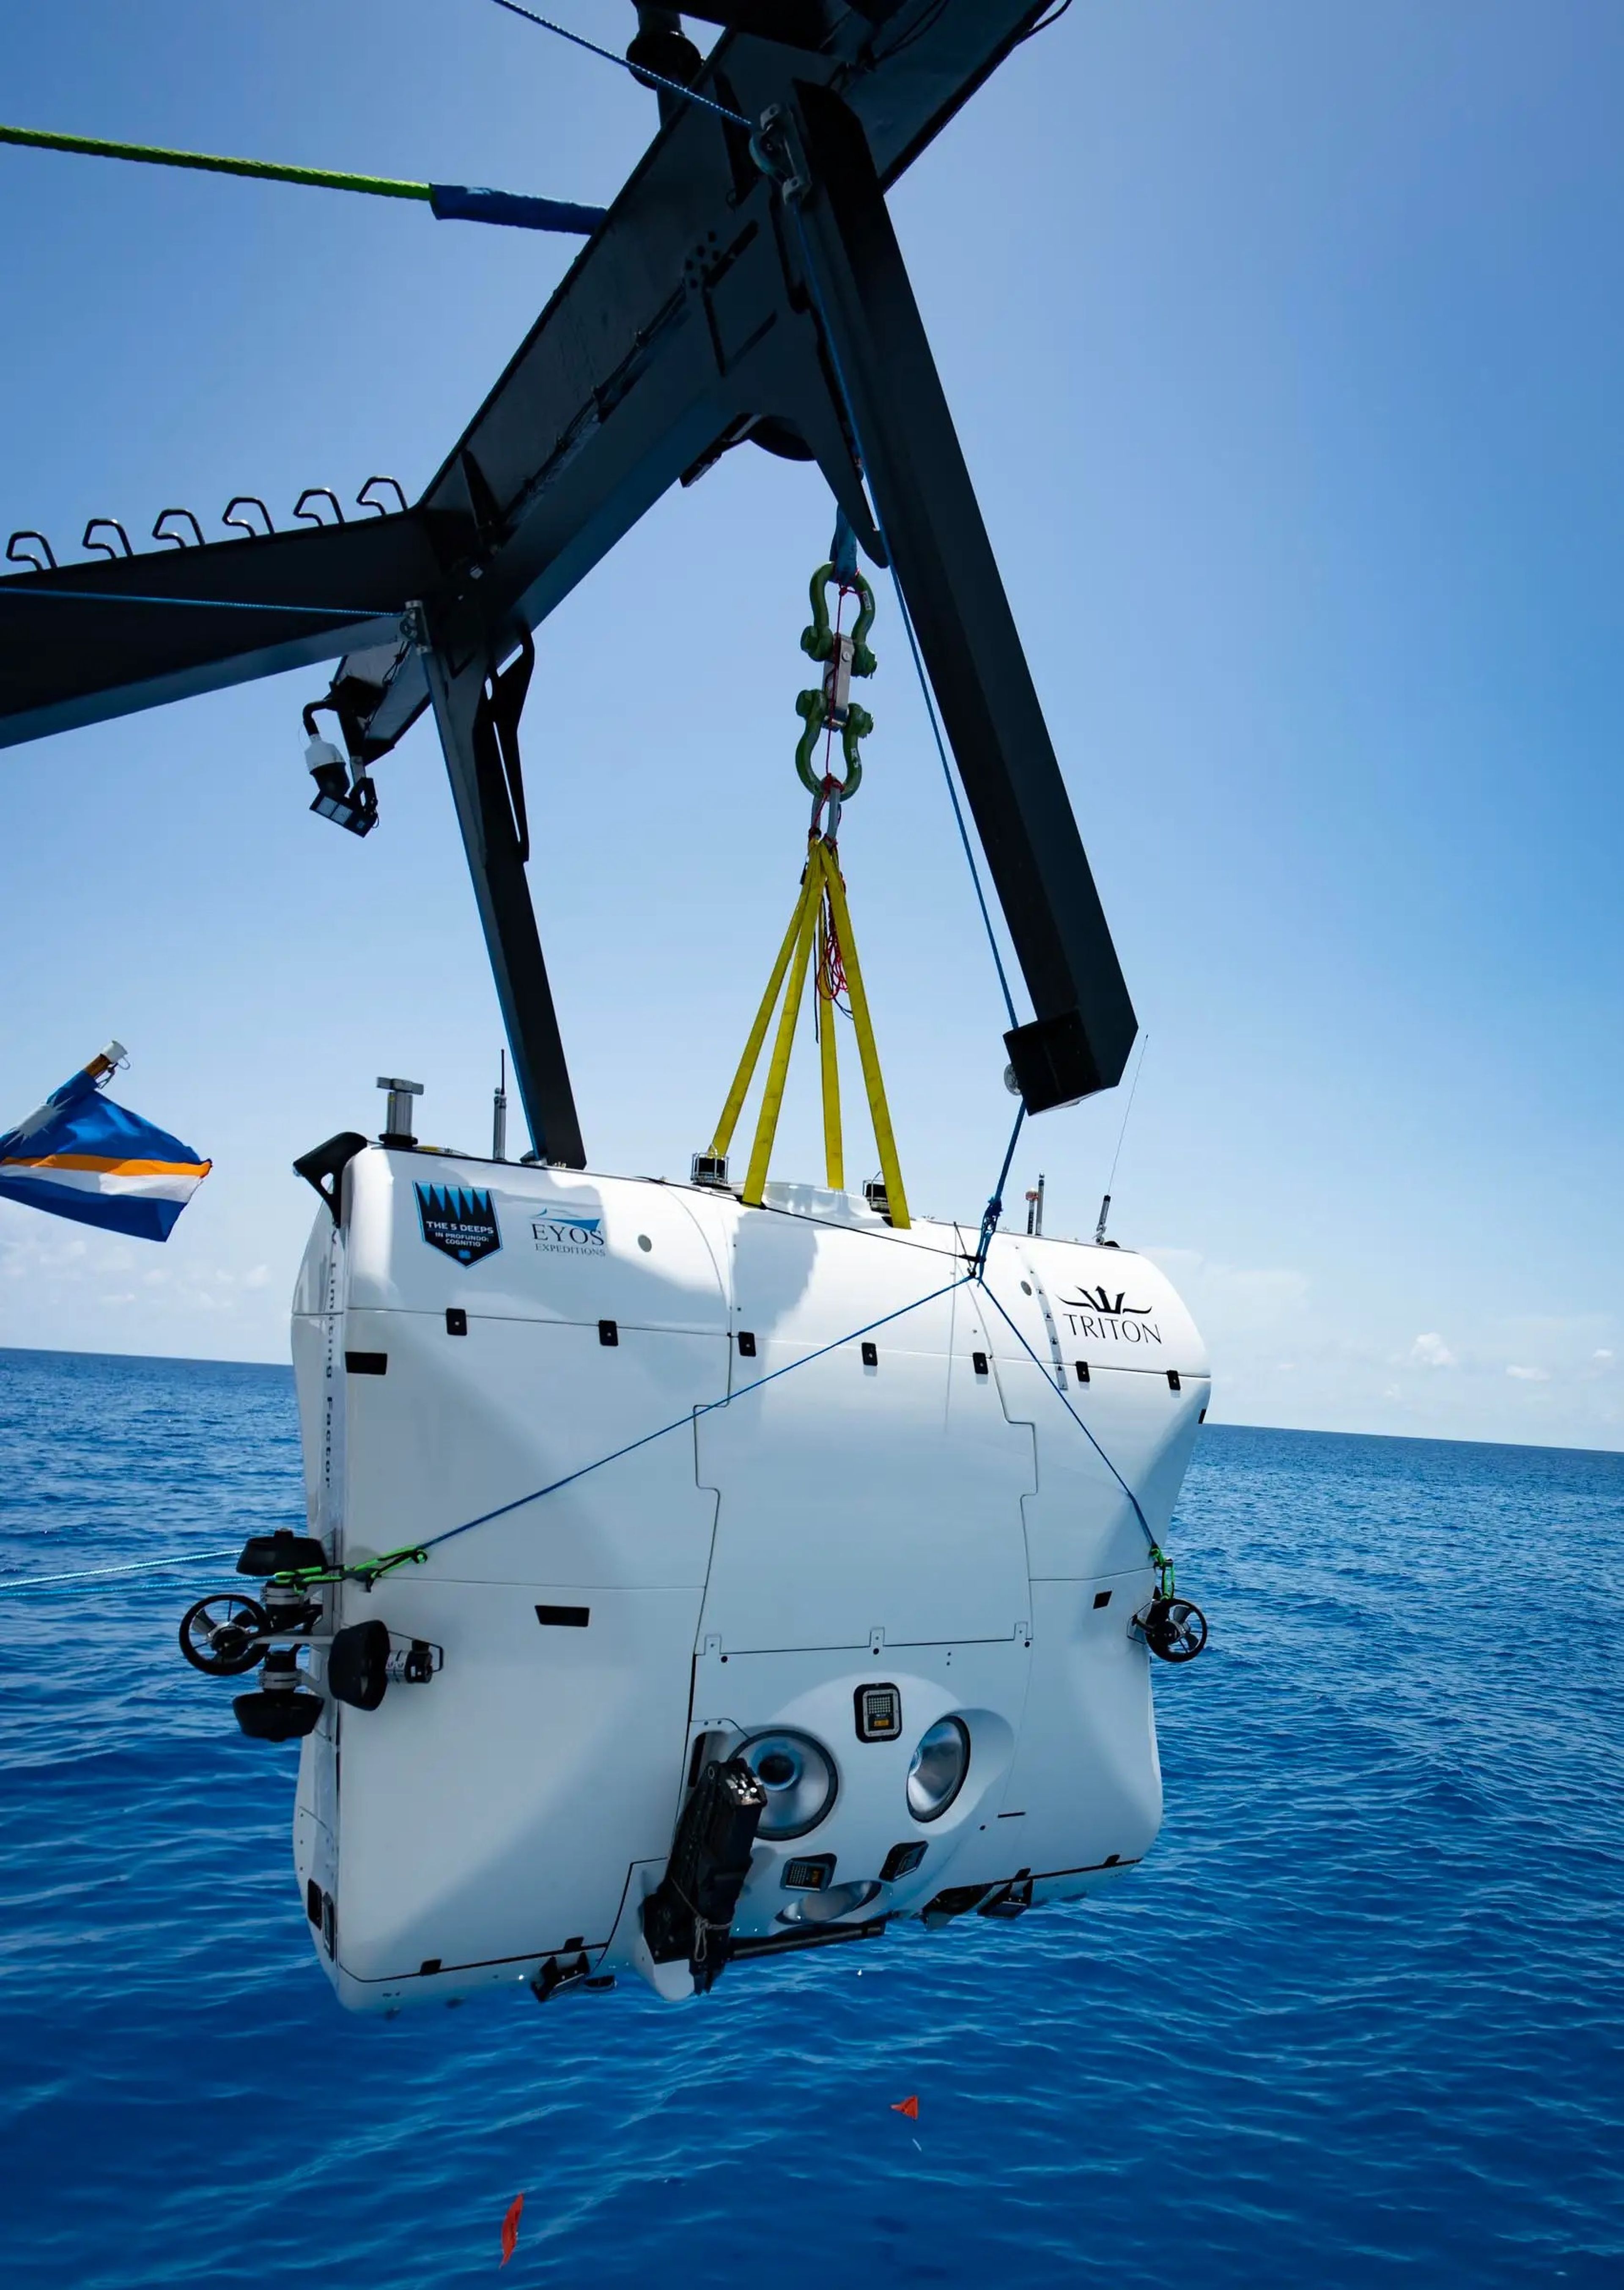 A Triton Submersible getting deposited in the ocean.